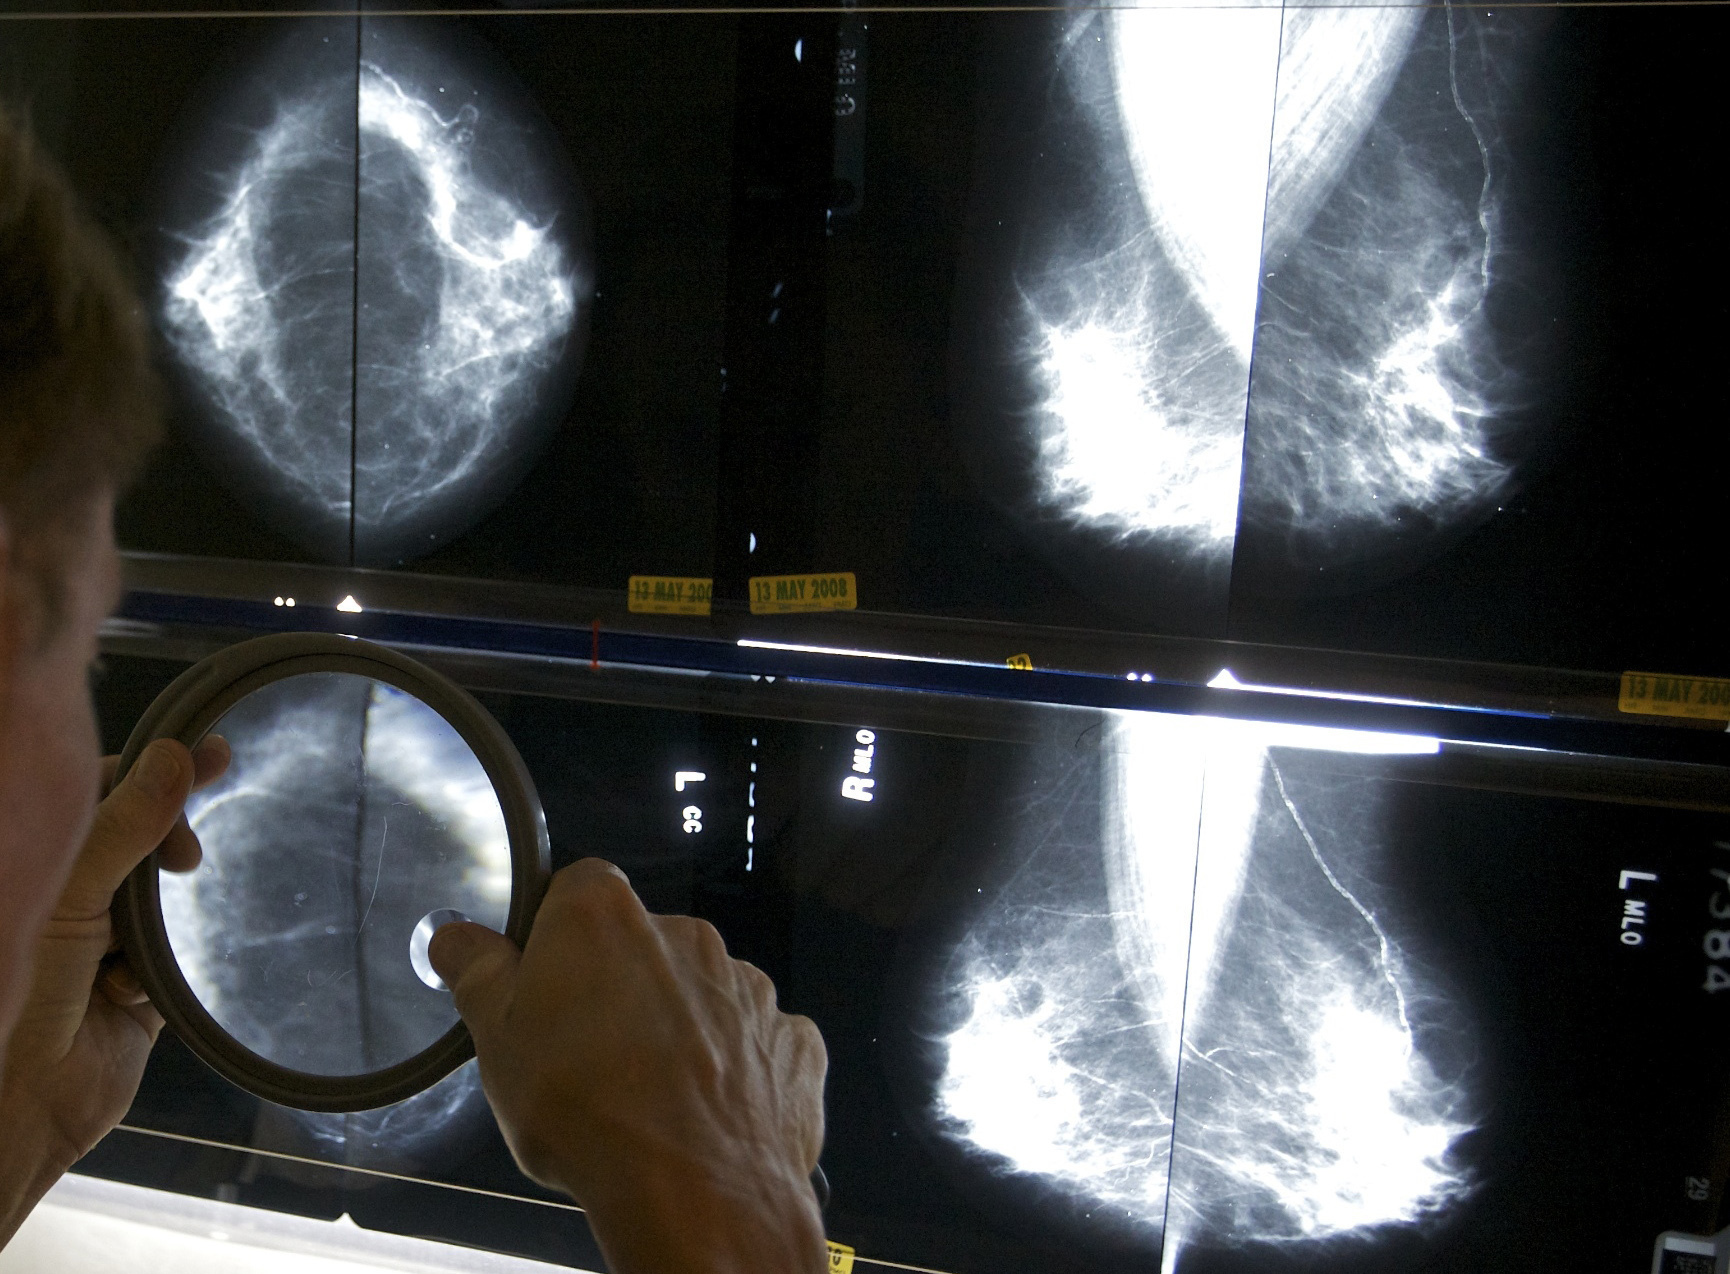 Can a Radiologist Diagnose Breast Cancer from Imaging Tests Alone?